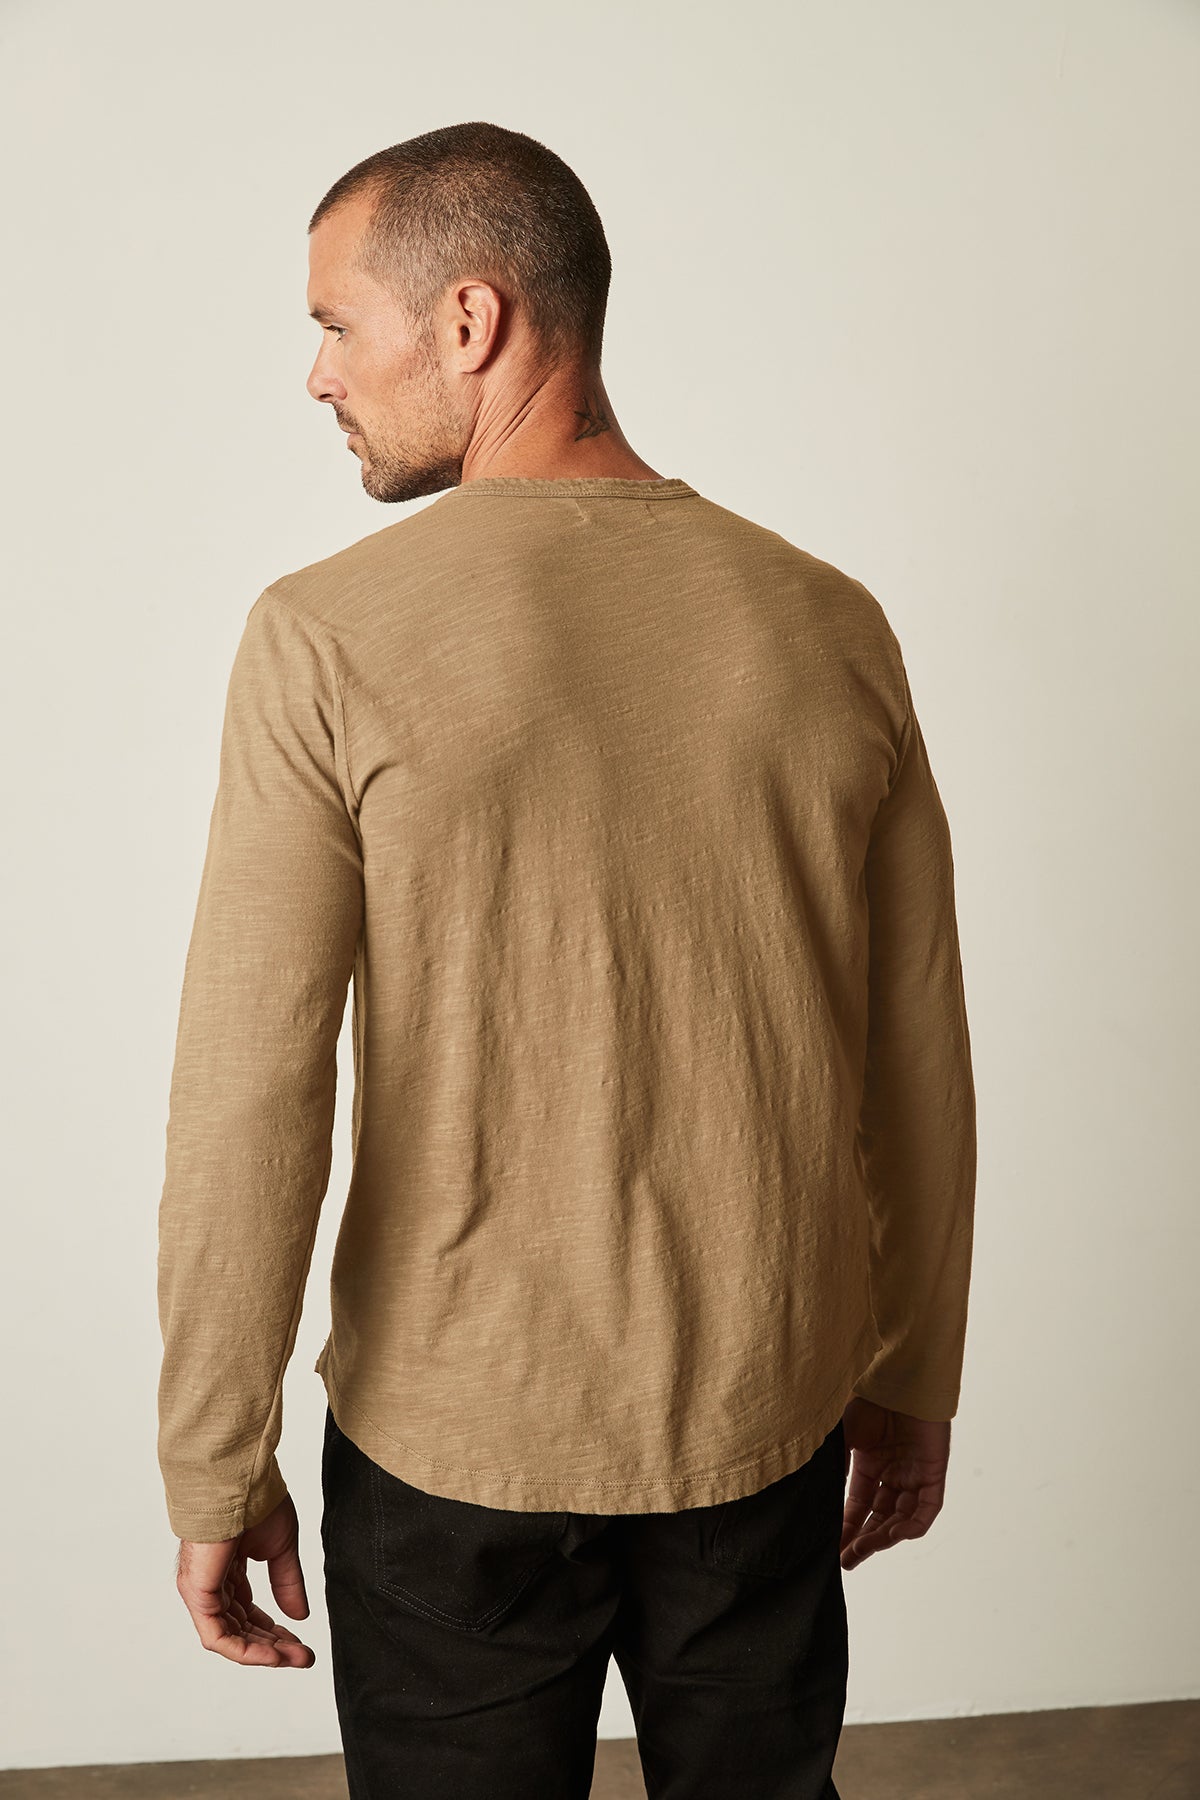   Kai Crew Neck Long Sleeve Tee in camel color with black denim back 